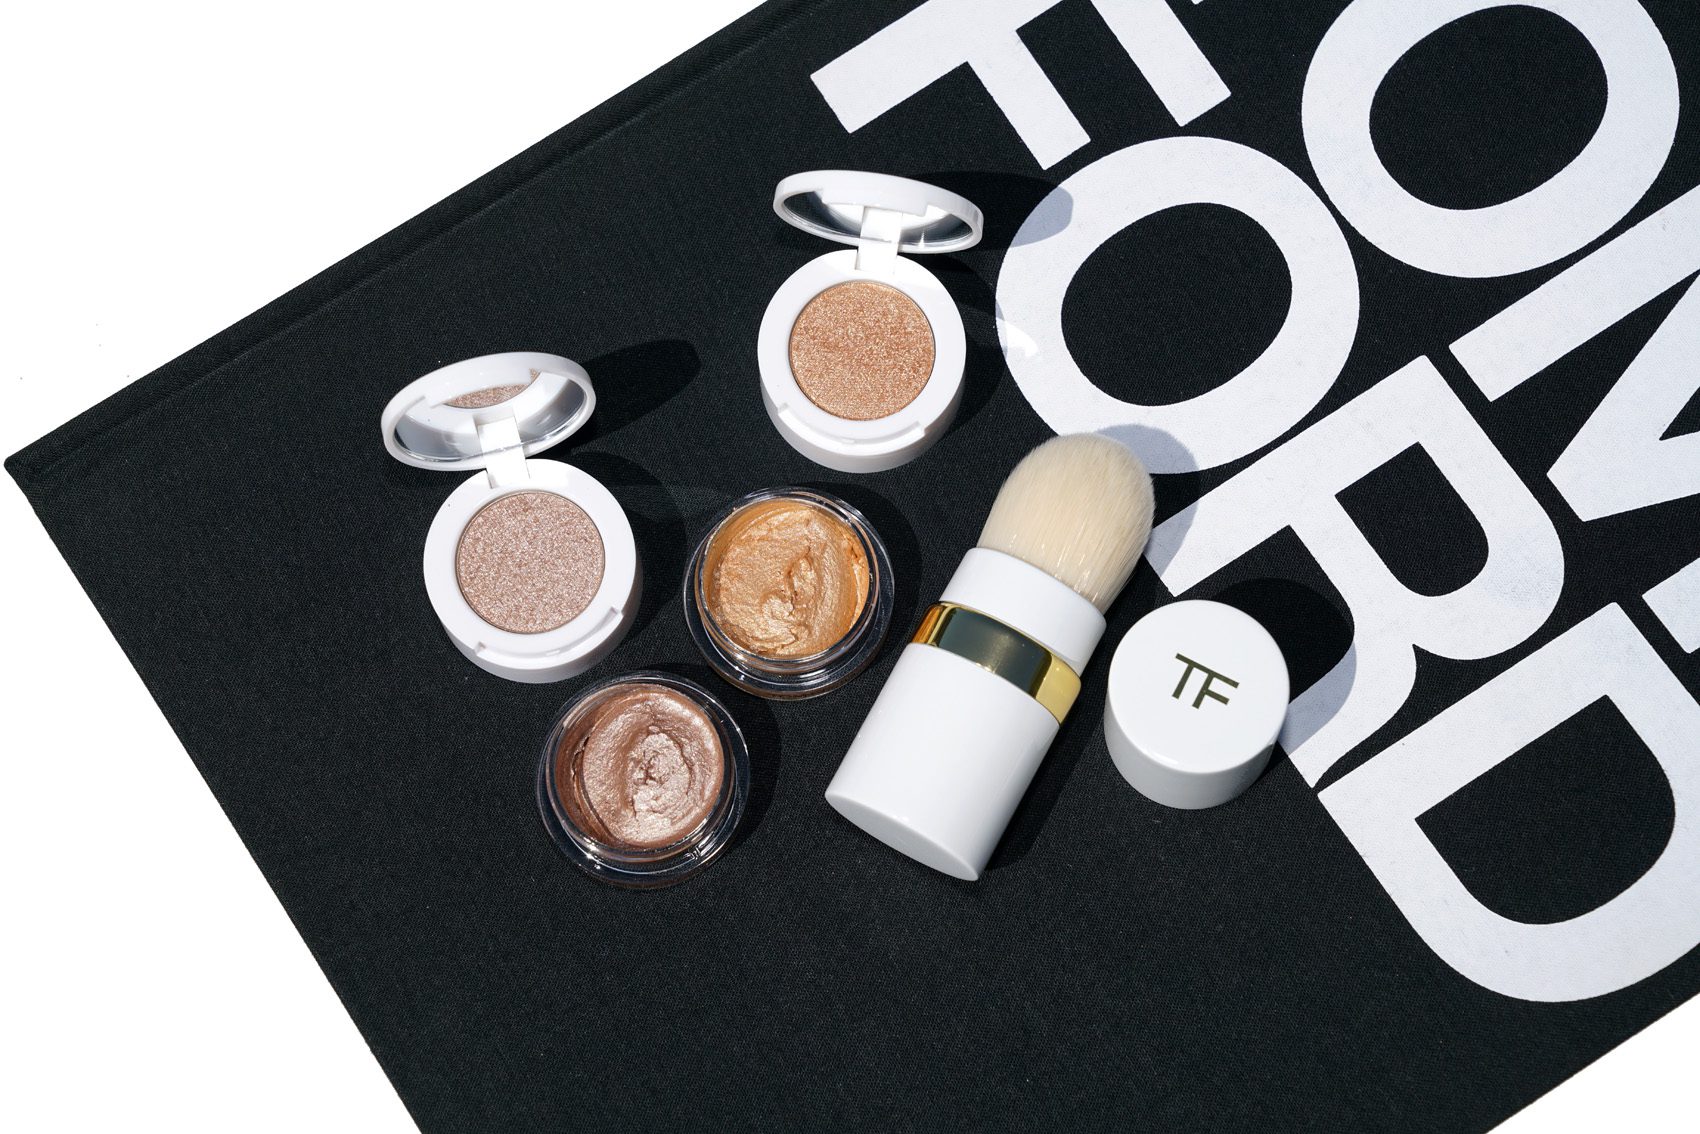 Tom Ford Beauty Heats Things Up This Summer With 'Soleil De Feu' Collection  - V Magazine